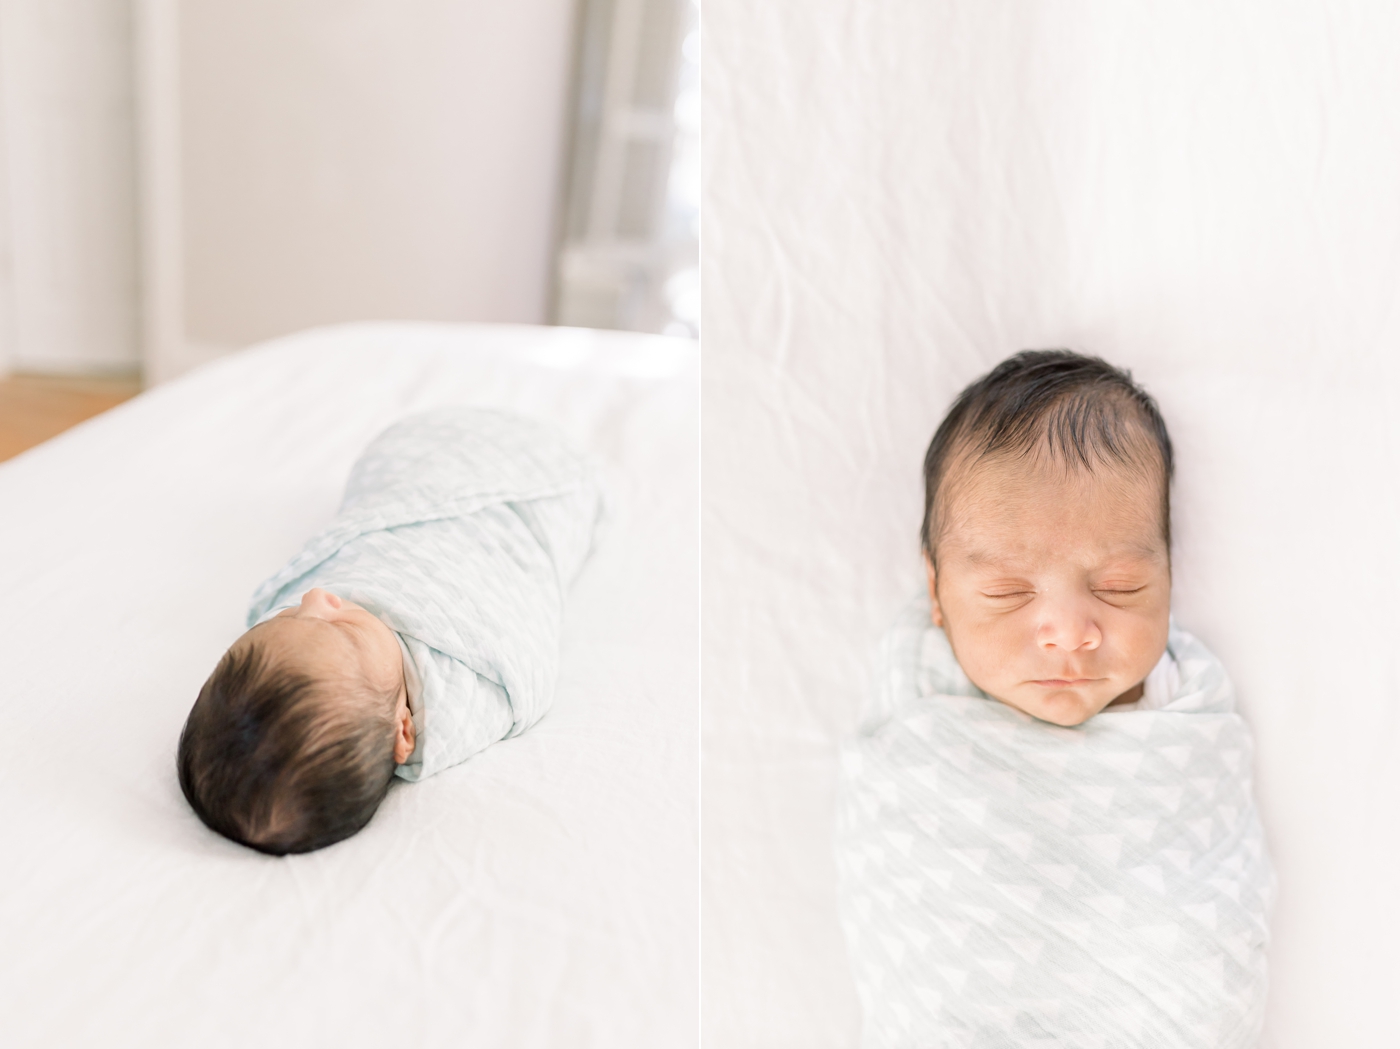 Newborn baby boy swaddled, laying on bed for in-home newborn photoshoot in Charleston, SC. Photo by Caitlyn Motycka Photography.